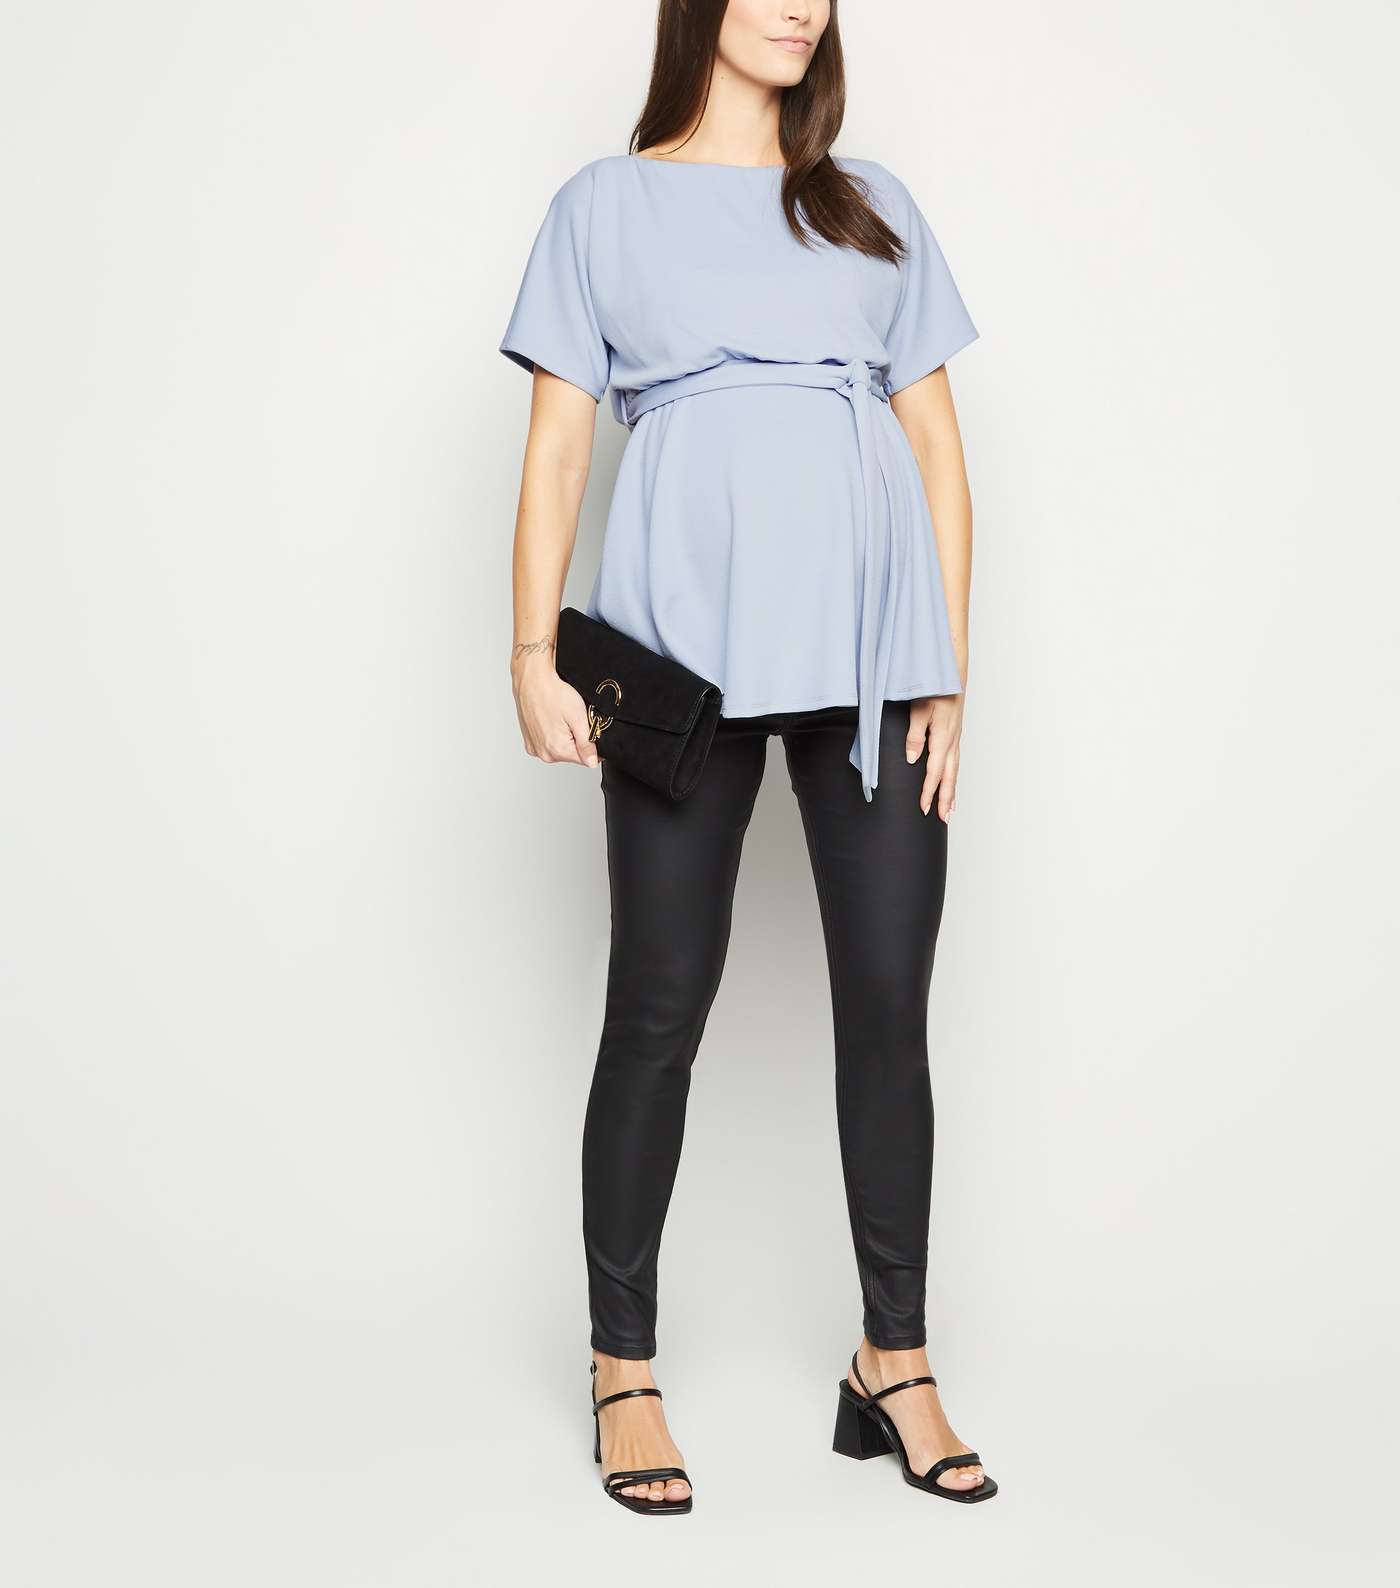 Maternity Pale Blue Batwing Top Image 2